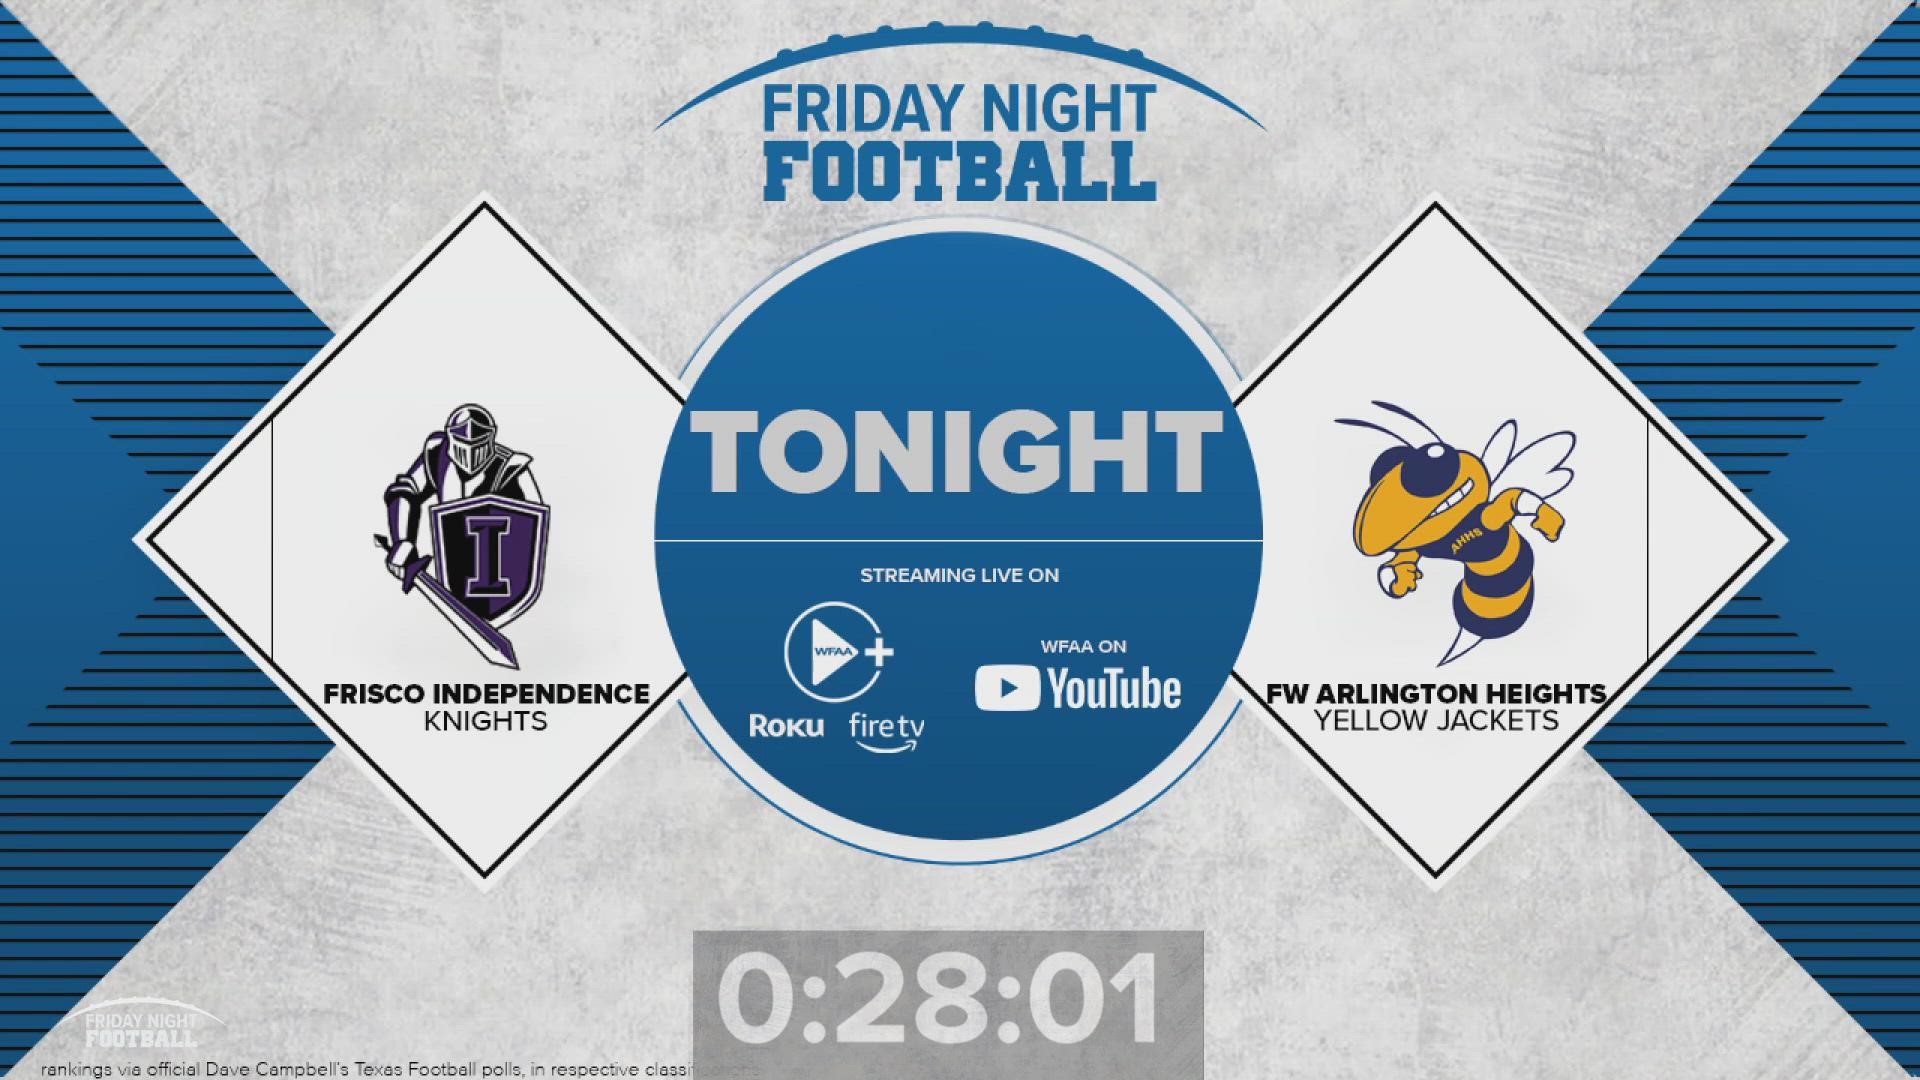 Frisco Independence and Fort Worth Arlington Heights square off in the Bi-District Round of the UIL Playoffs on Friday Night Football